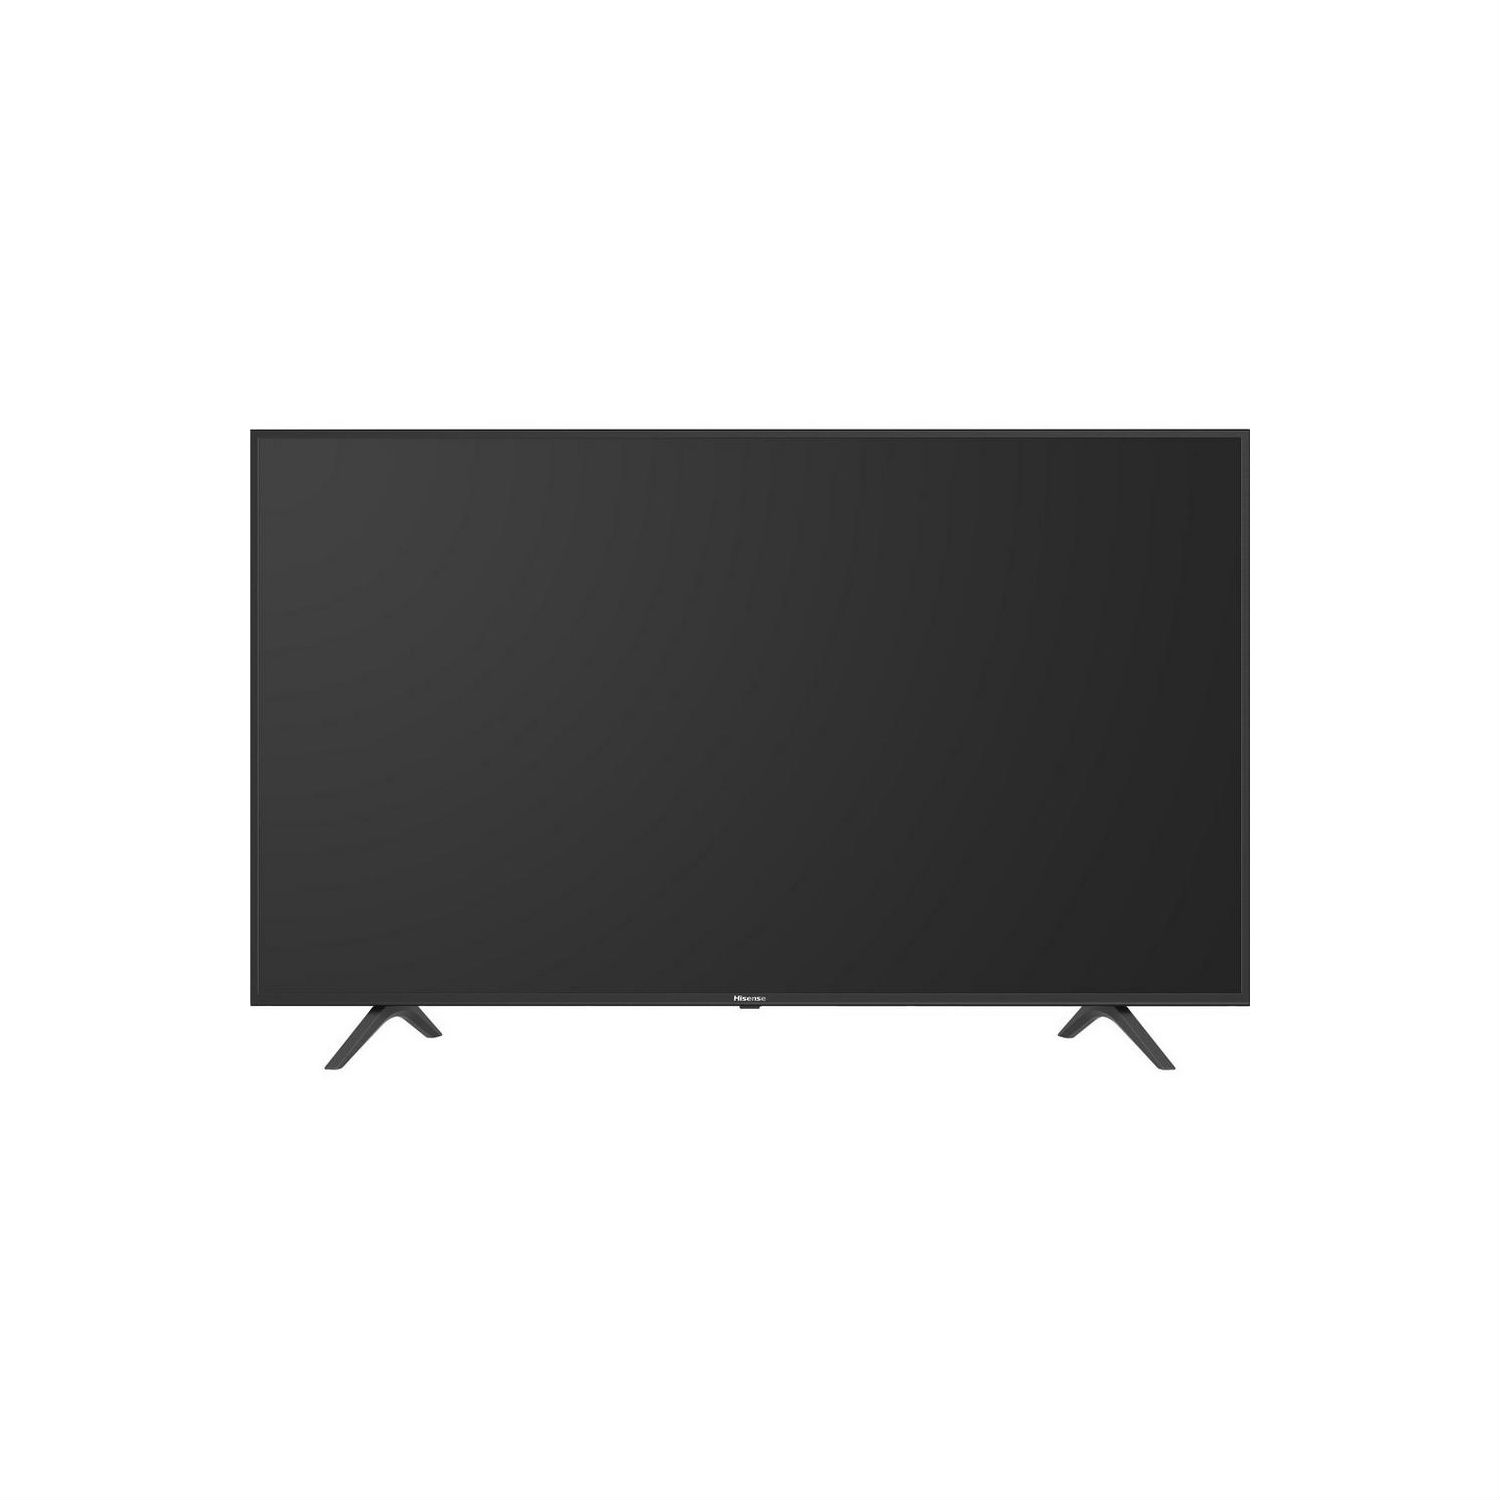 Hisense 50" 4K UHD HDR- SMART TV - Freeview - A+ Rated - 0